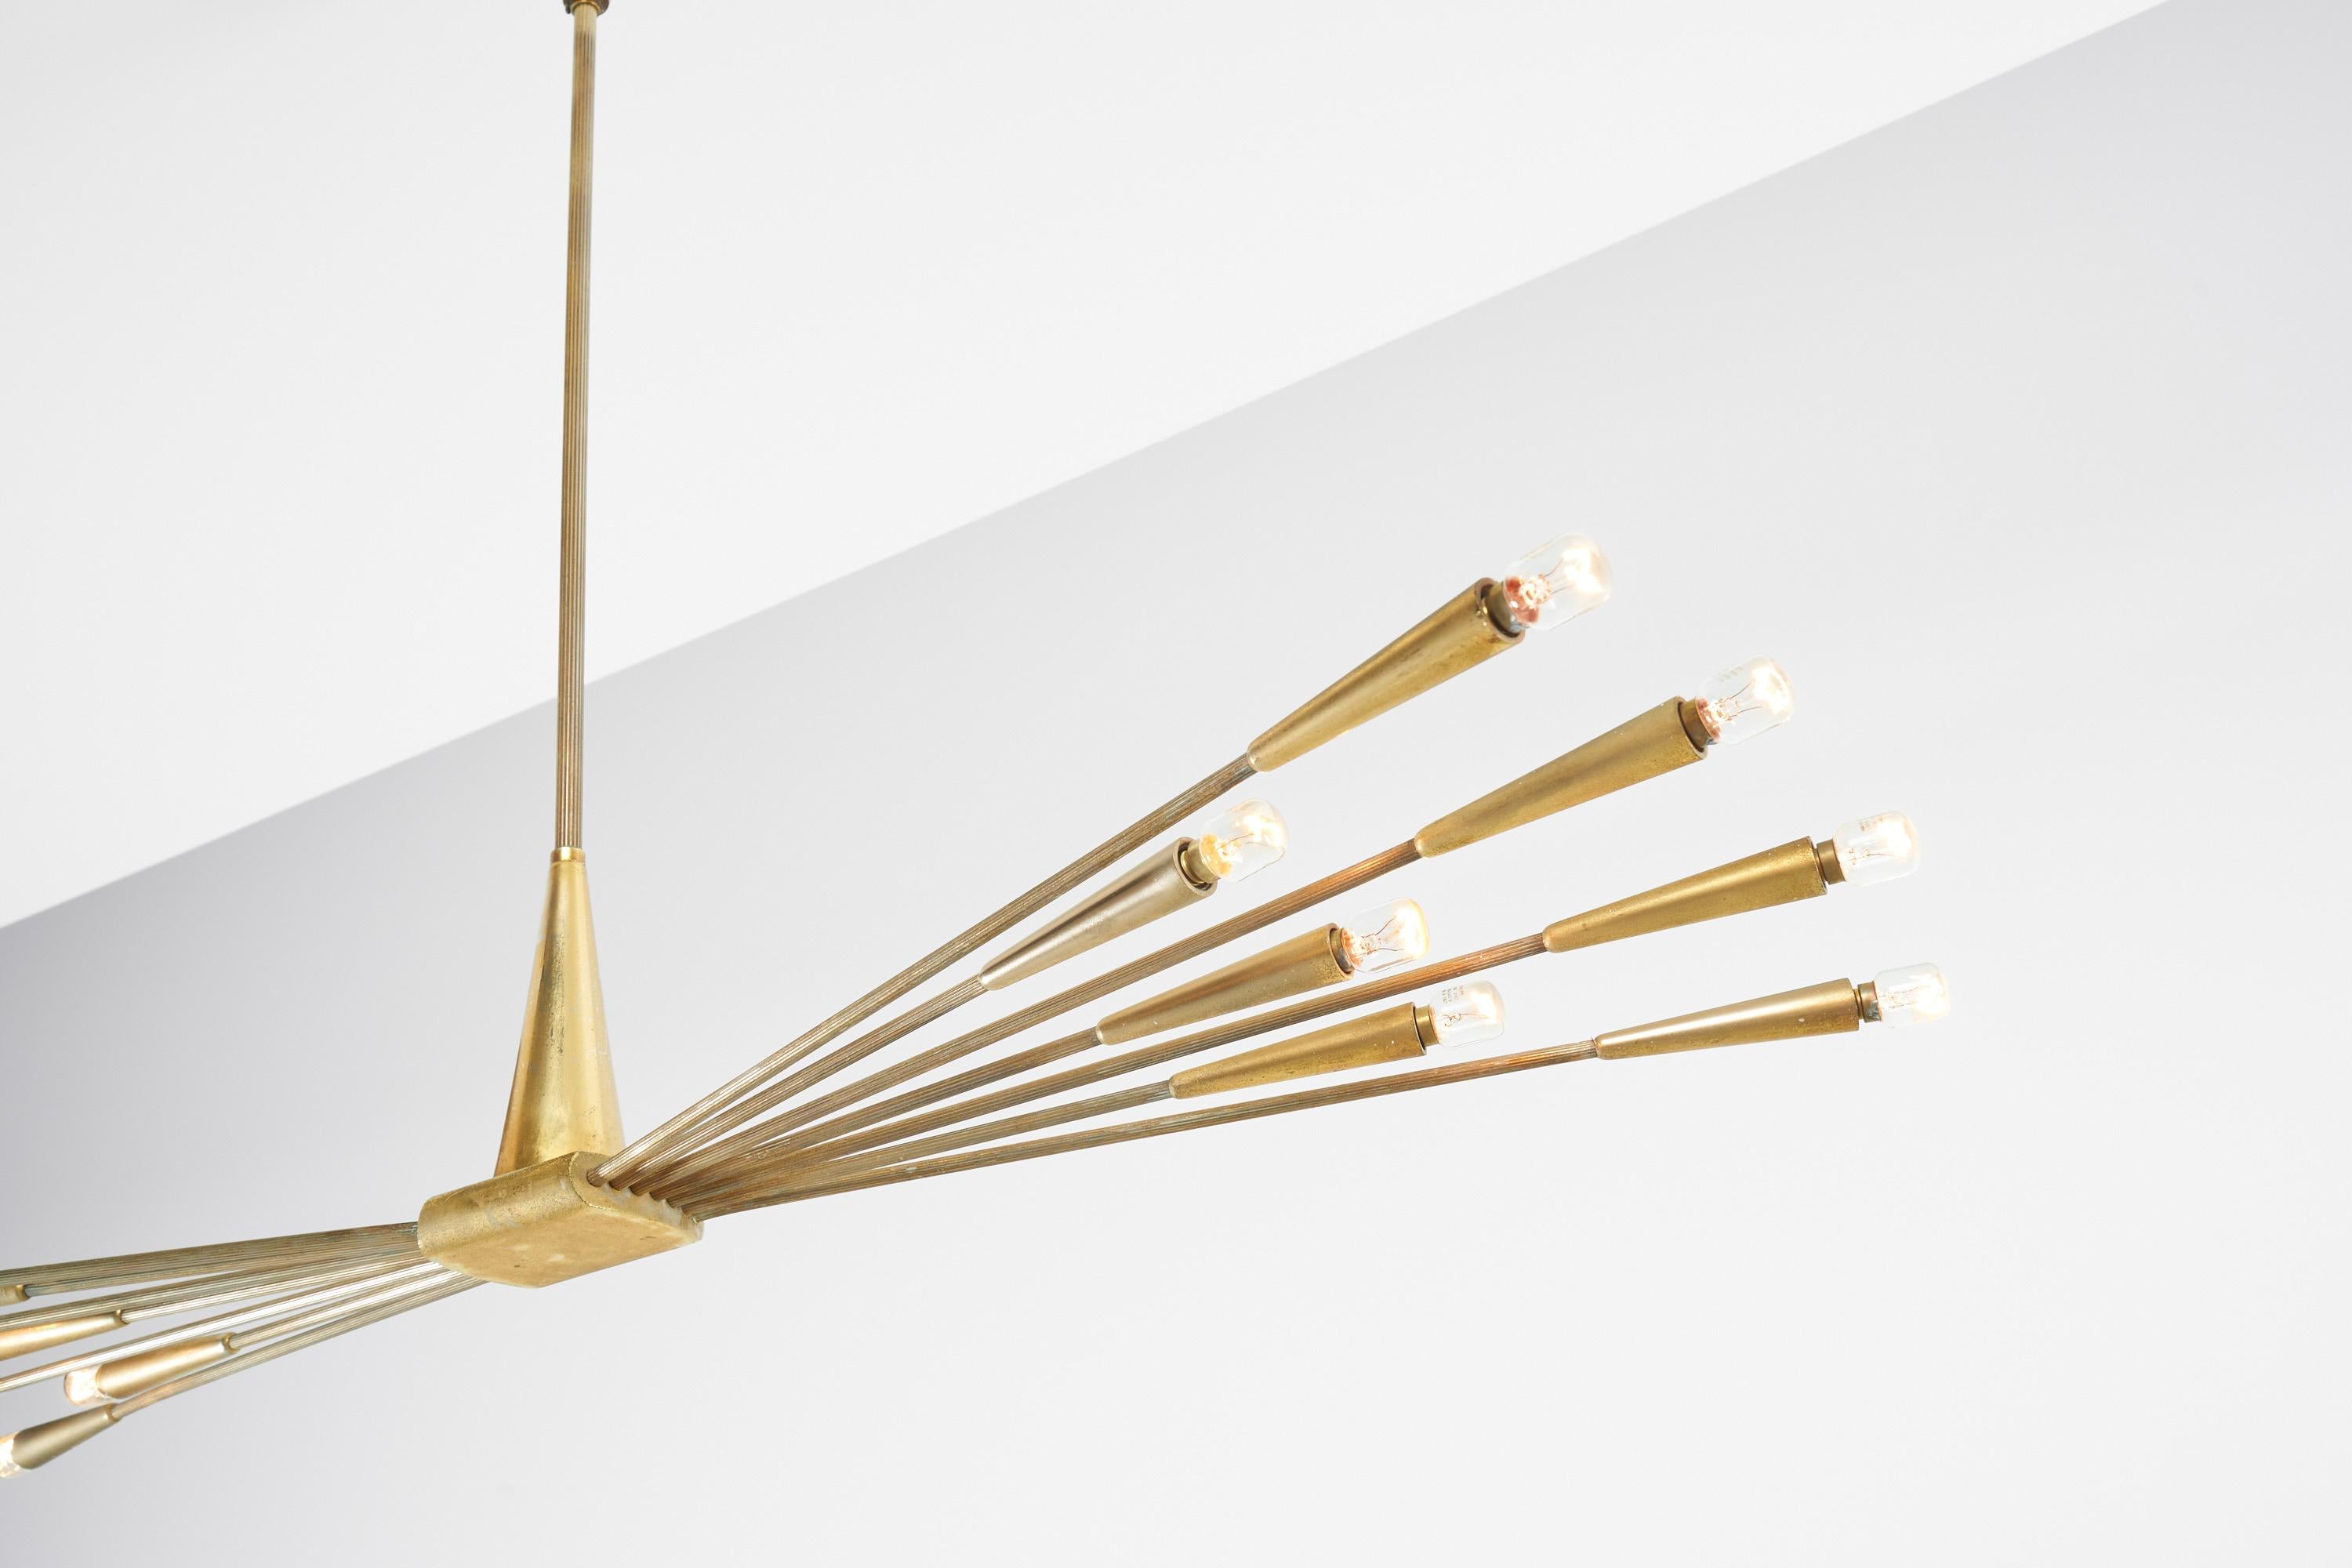 Striking iconic shaped so called Sputnik chandelier designed by Oscar Torlasco and manufactured by Lumi Milano, Italy 1950. This chandelier is from the 1950s when sputniks shaped lamps were popular because of the sputnik space program in the 1950s.